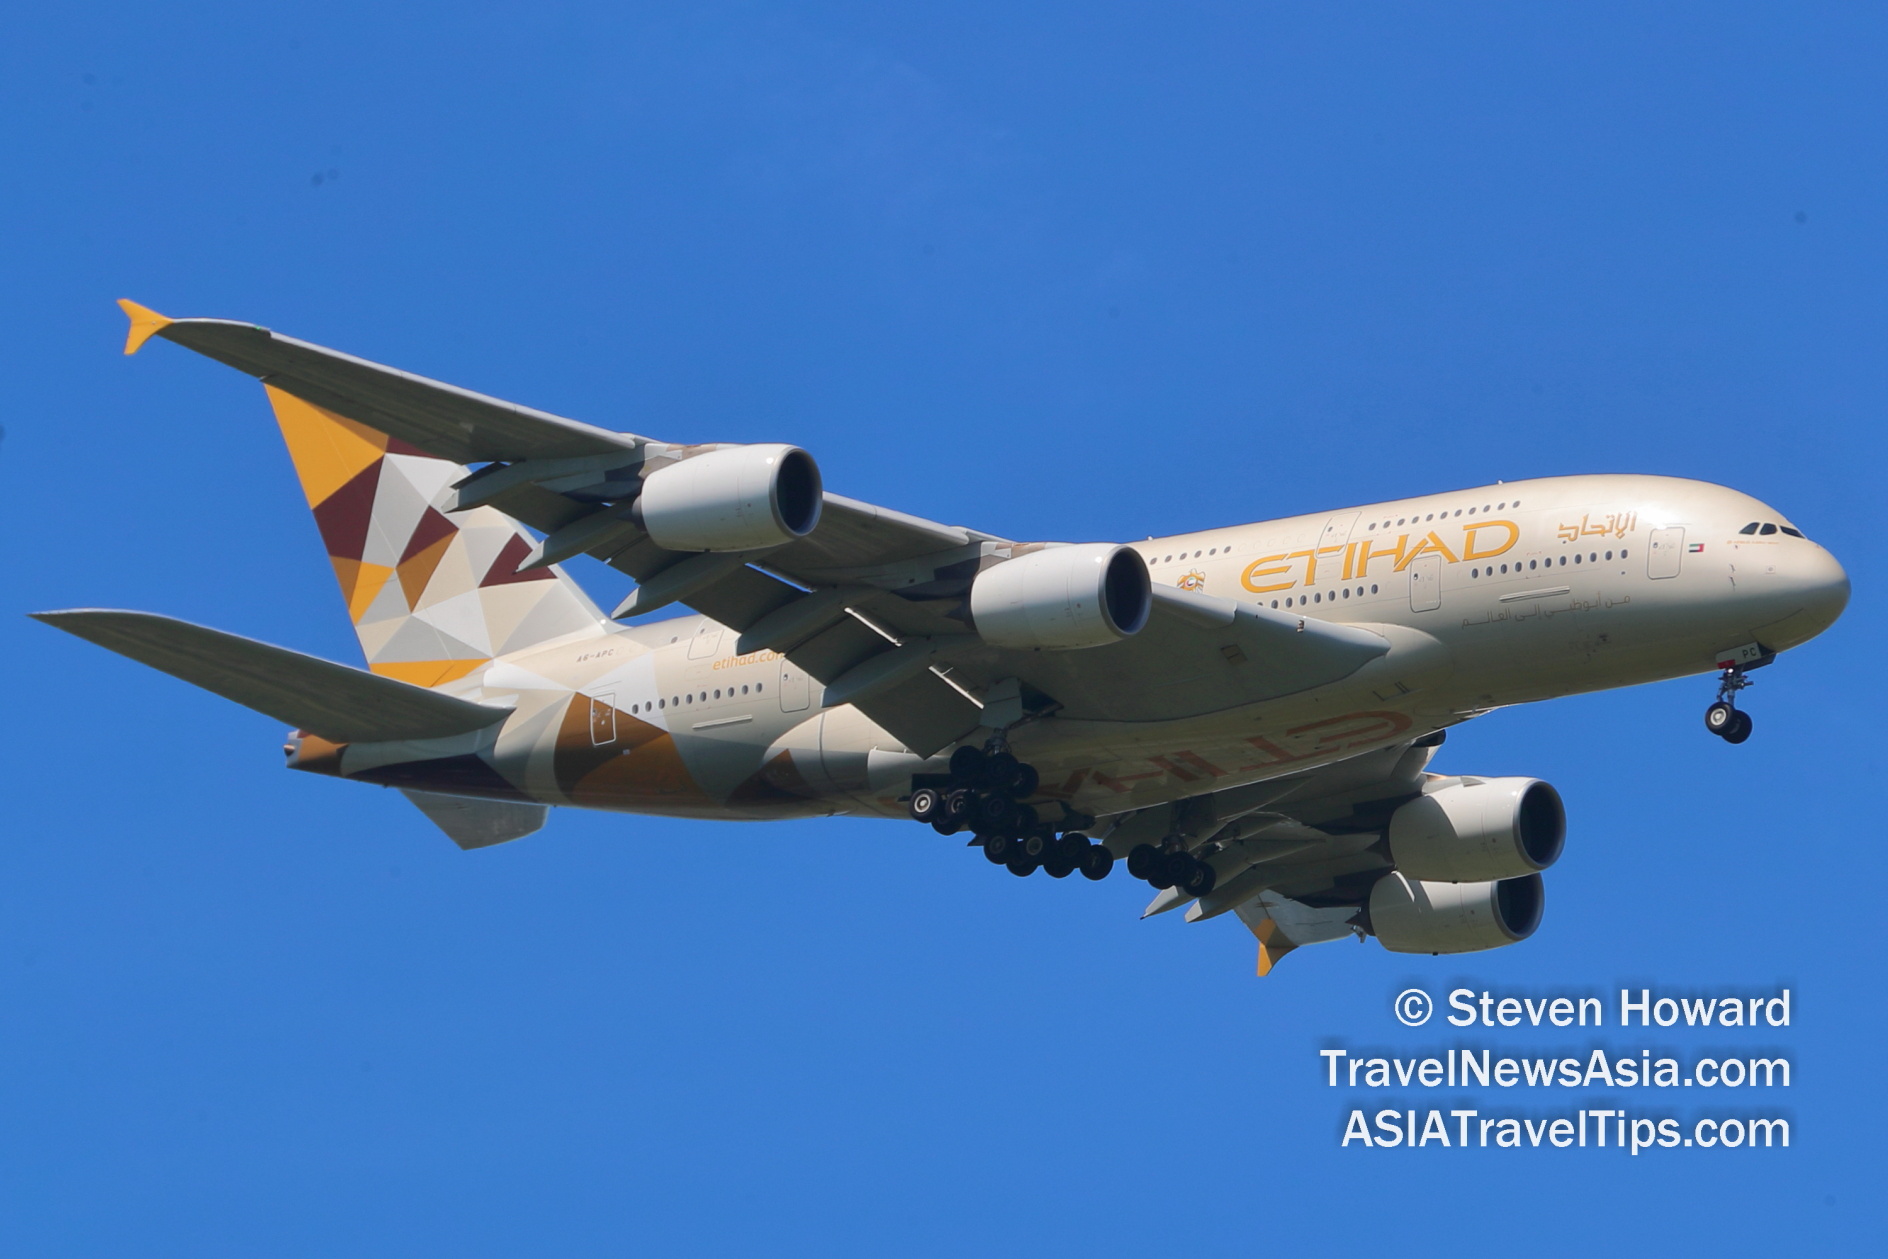 Etihad Airways Airbus A380 reg: A6-APC. Picture by Steven Howard of TravelNewsAsia.com Click to enlarge.